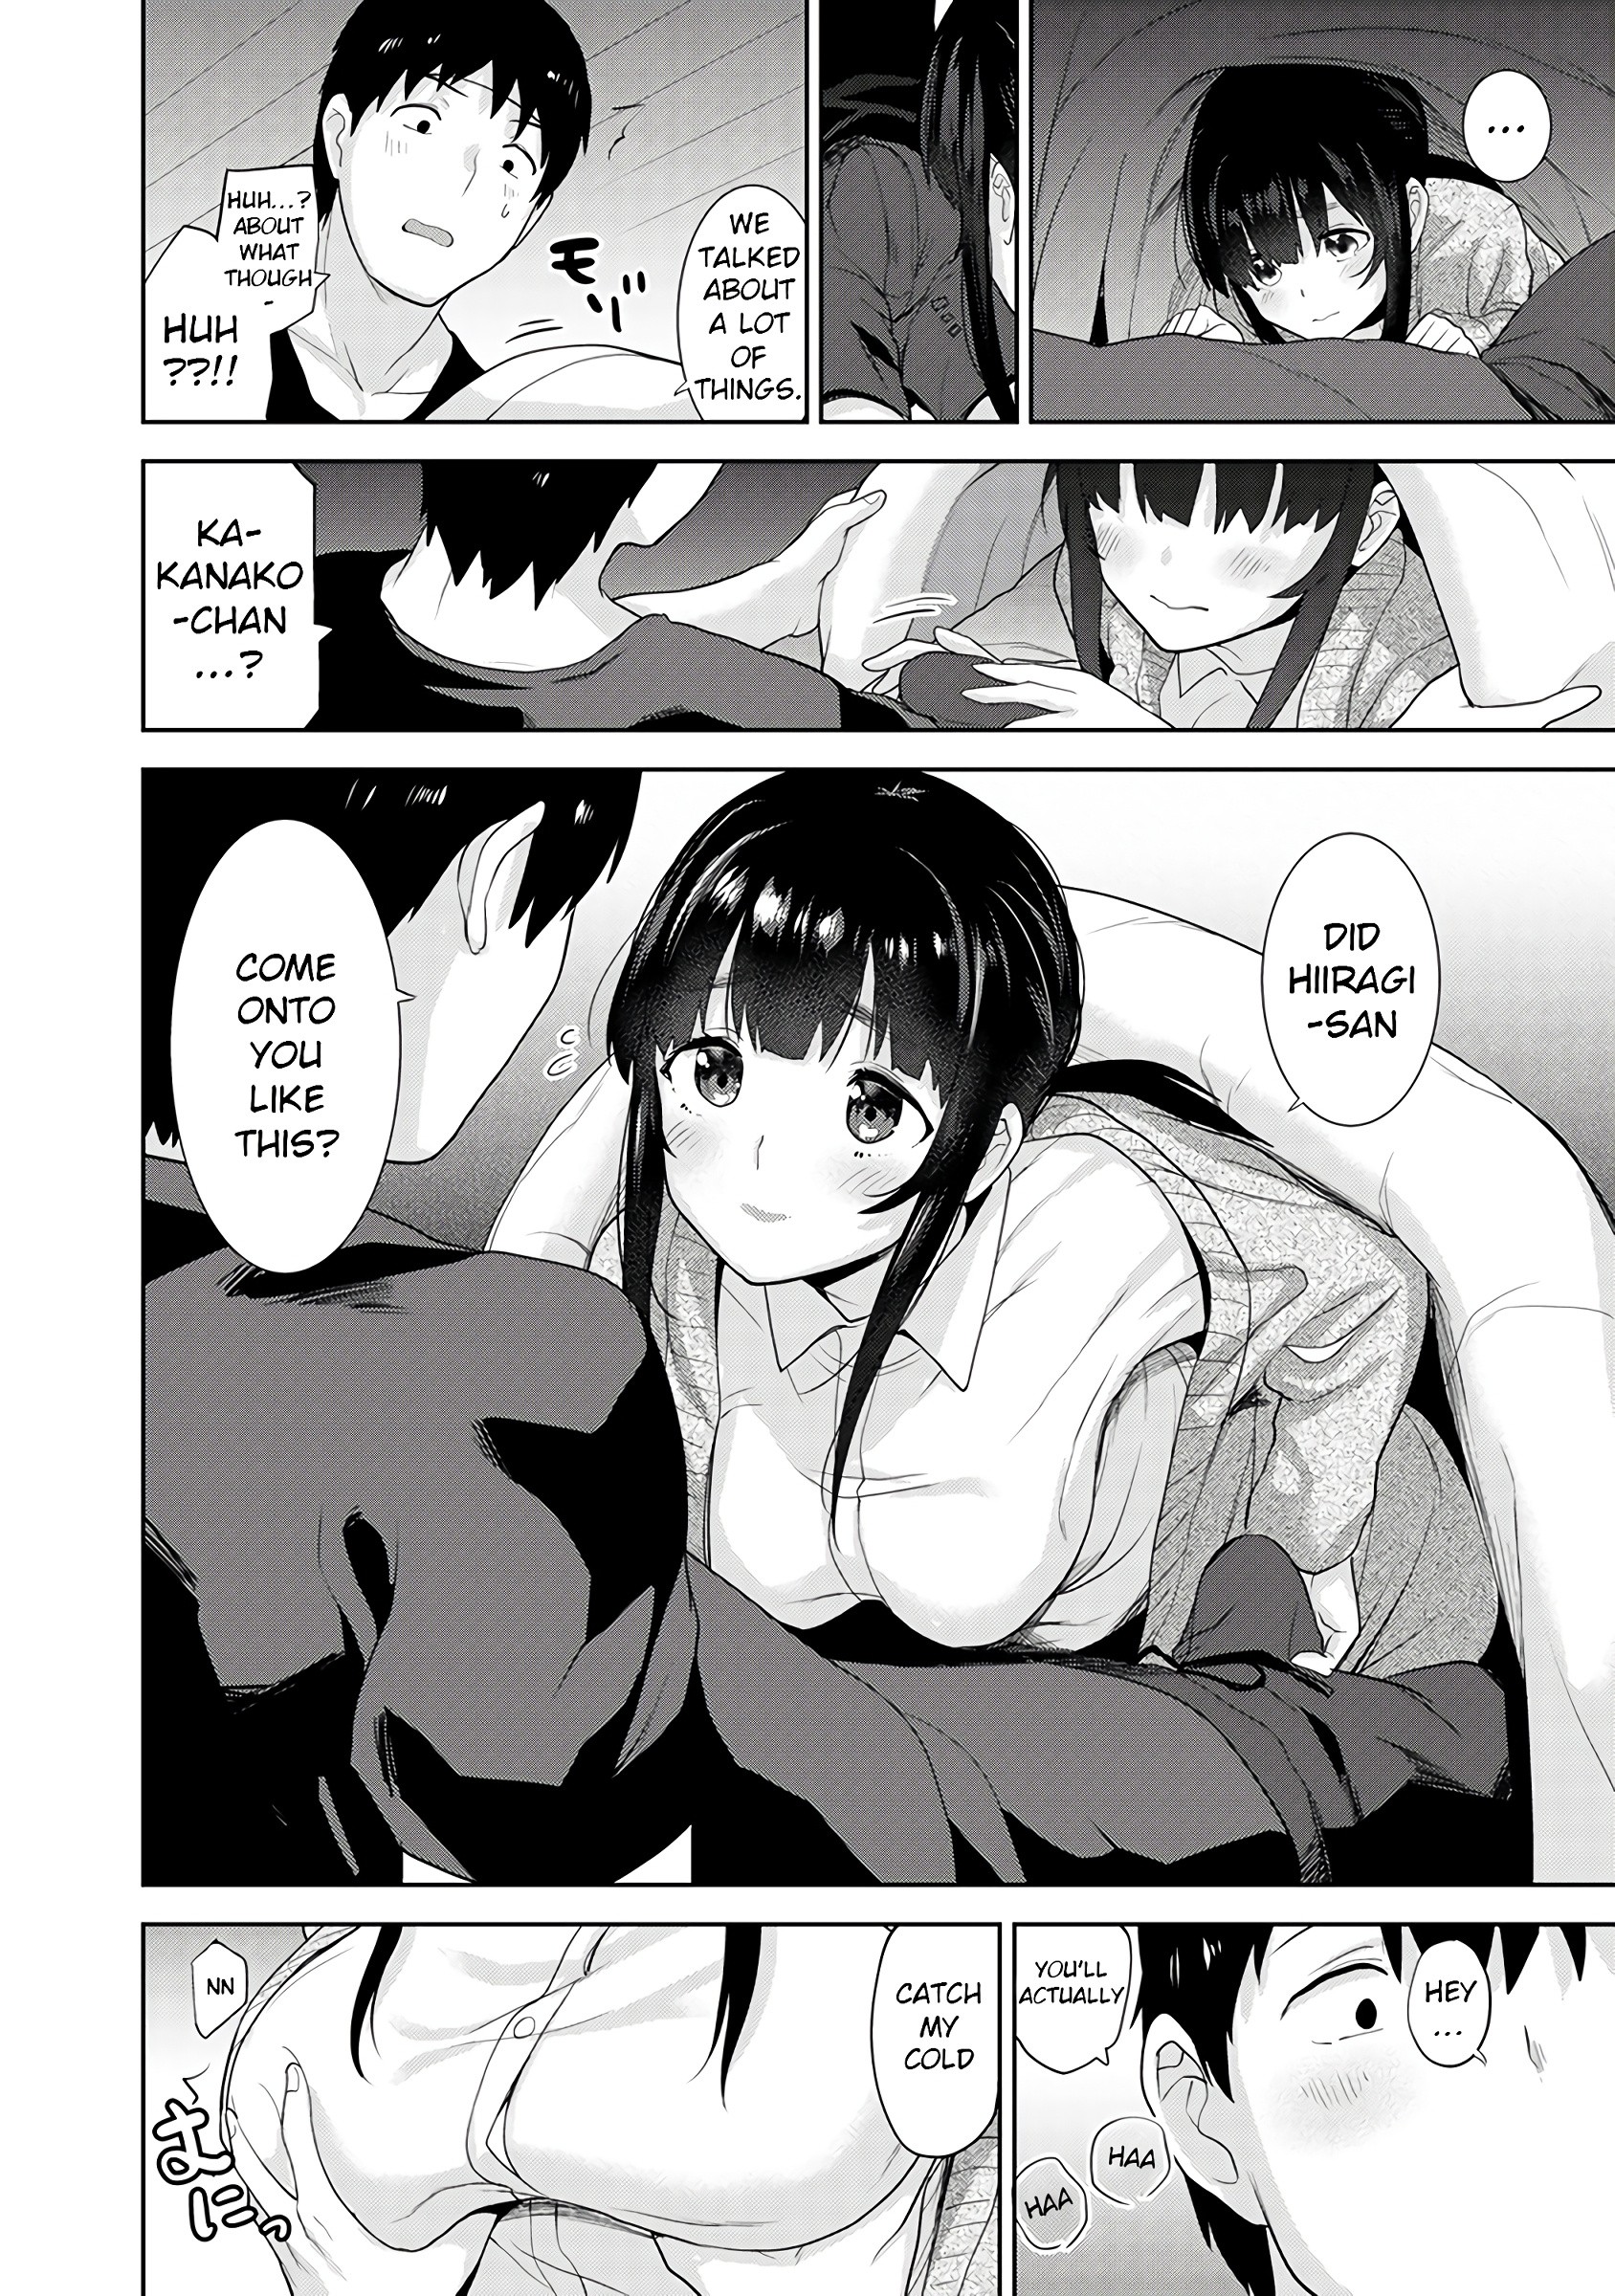 Method to Catch a Pretty Girl 9 hentai manga picture 18